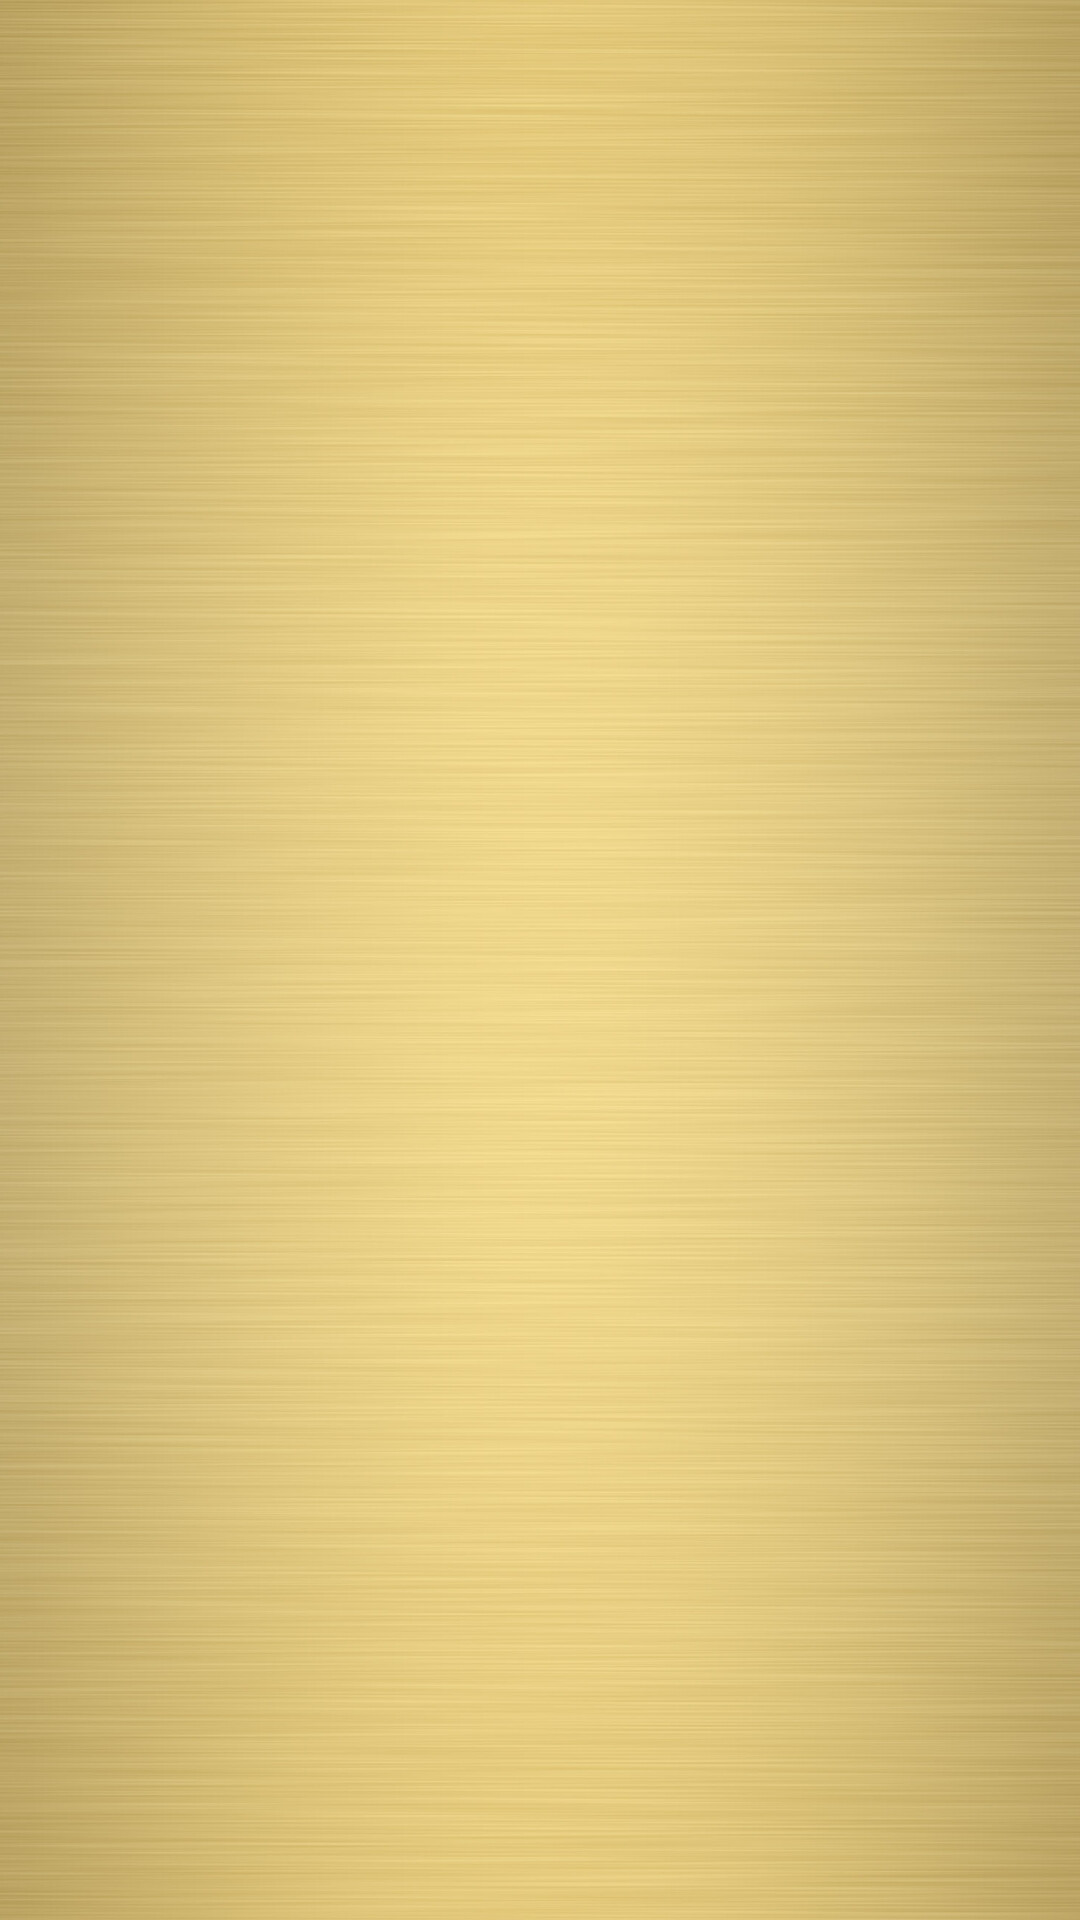 Gold Foil: The wooden surface covered with thin layers of precious metal, Abstract. 1080x1920 Full HD Wallpaper.